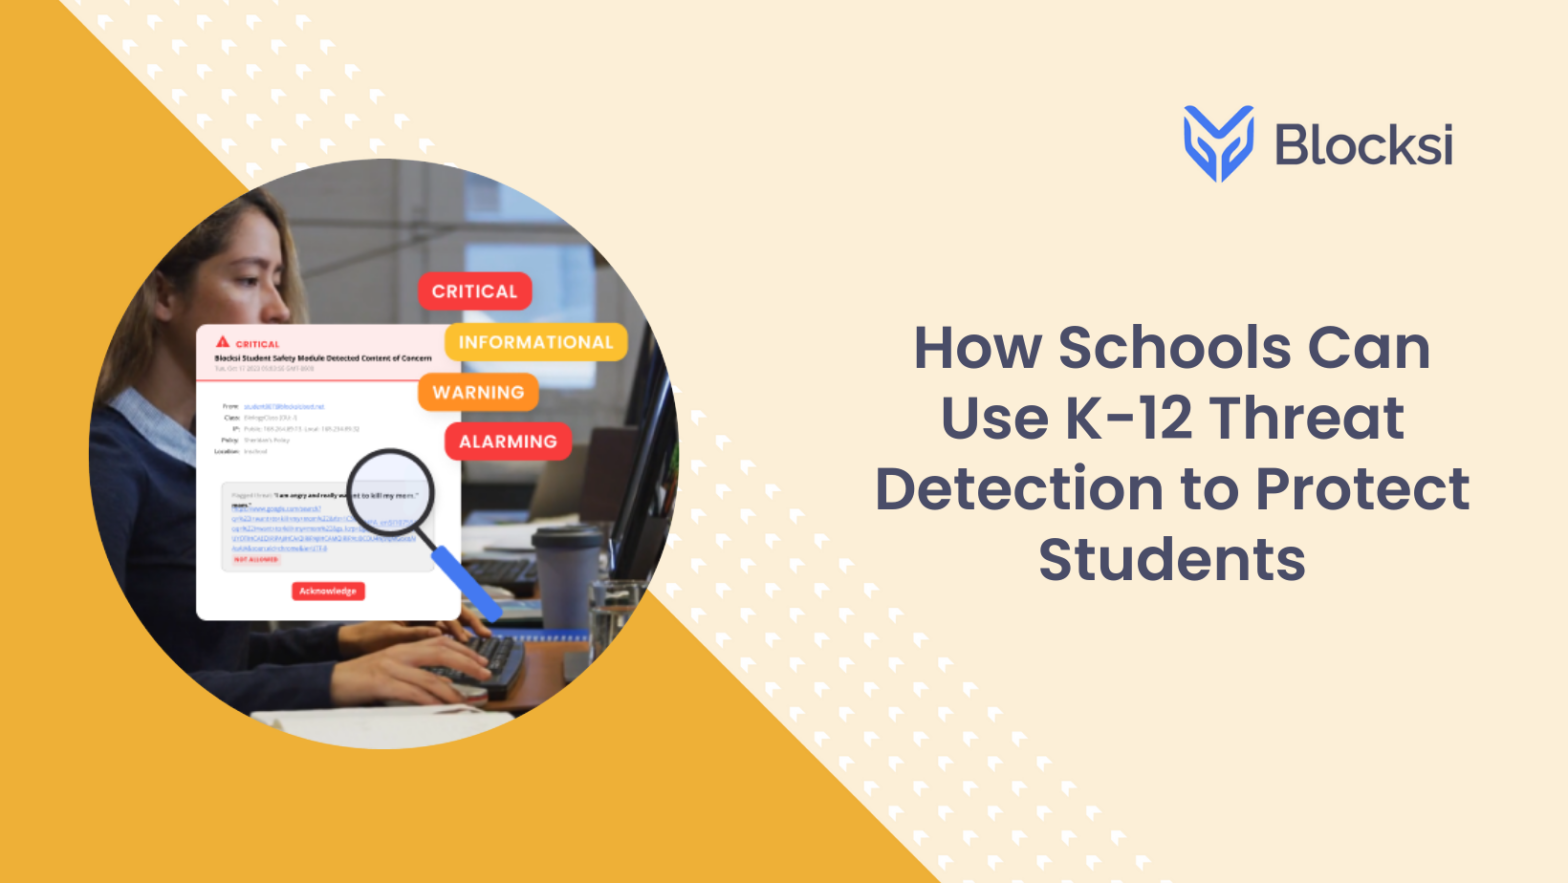 How Schools Can Use K-12 Threat Detection to Protect Students